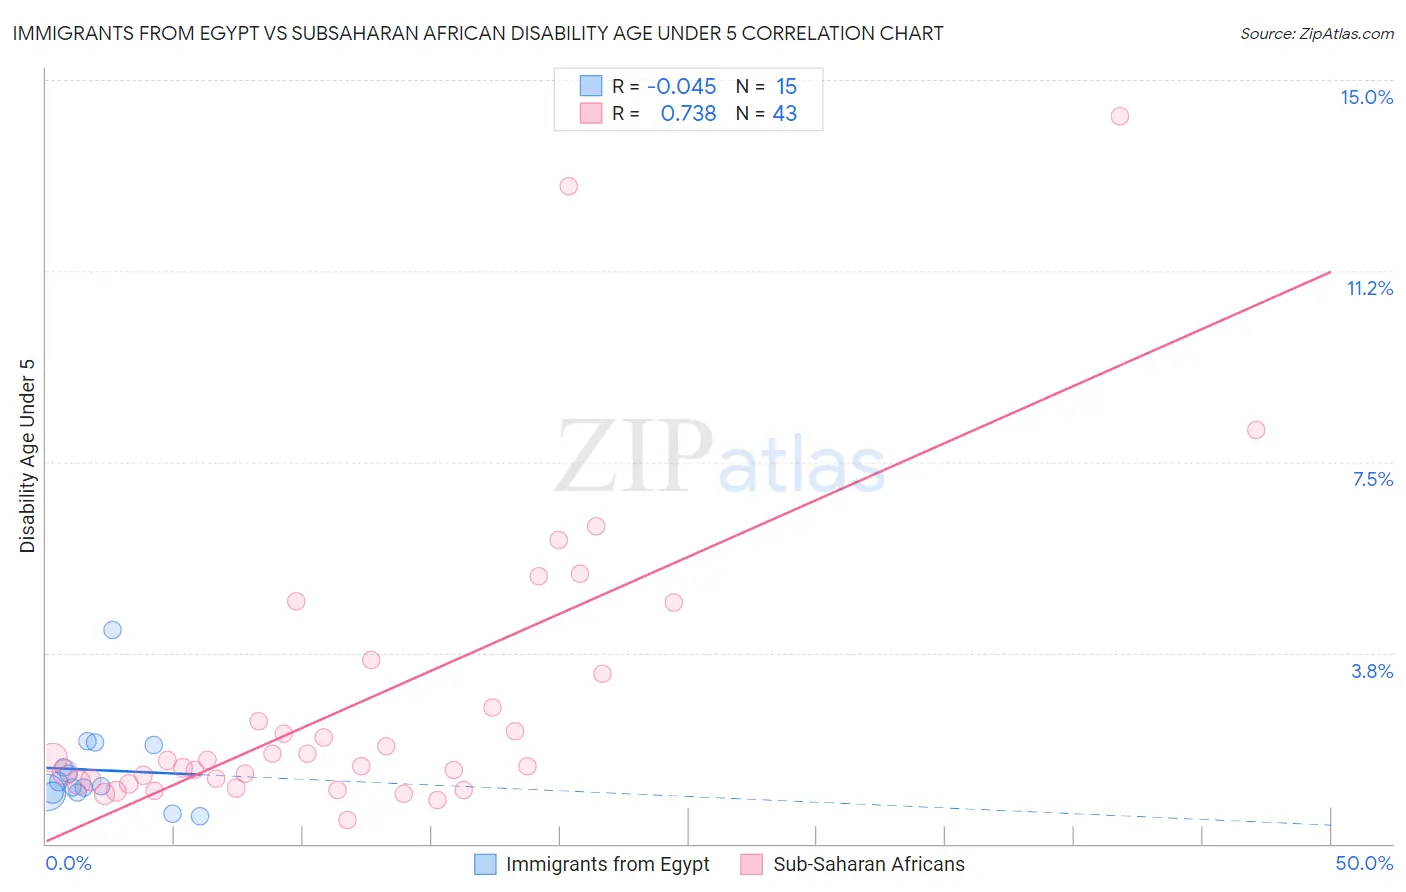 Immigrants from Egypt vs Subsaharan African Disability Age Under 5